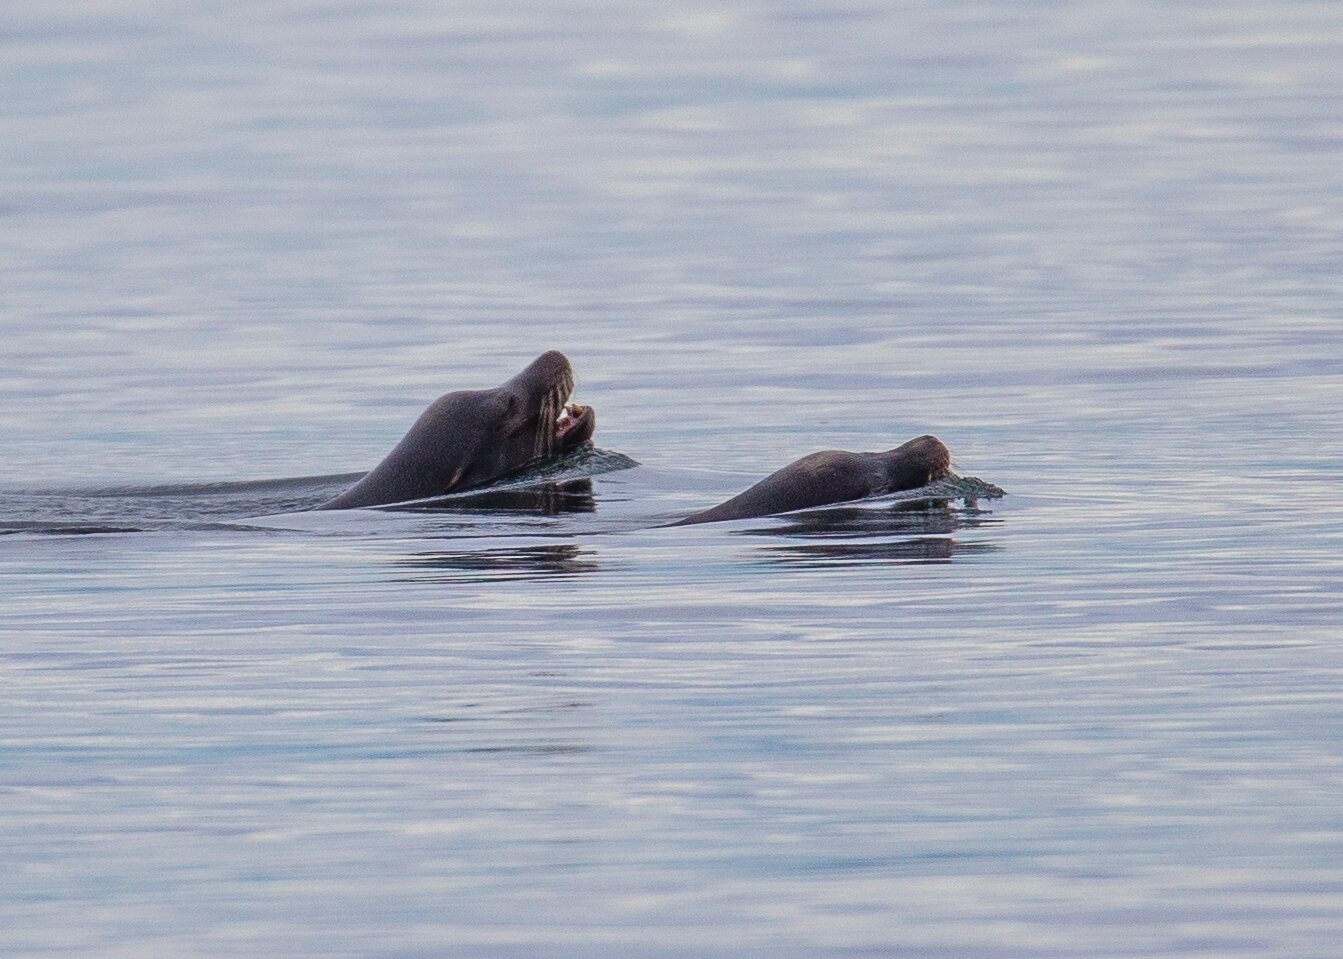  I’m not quite sure, but I think these might be California Sea Lions, rather than the more common Steller Sea Lions 